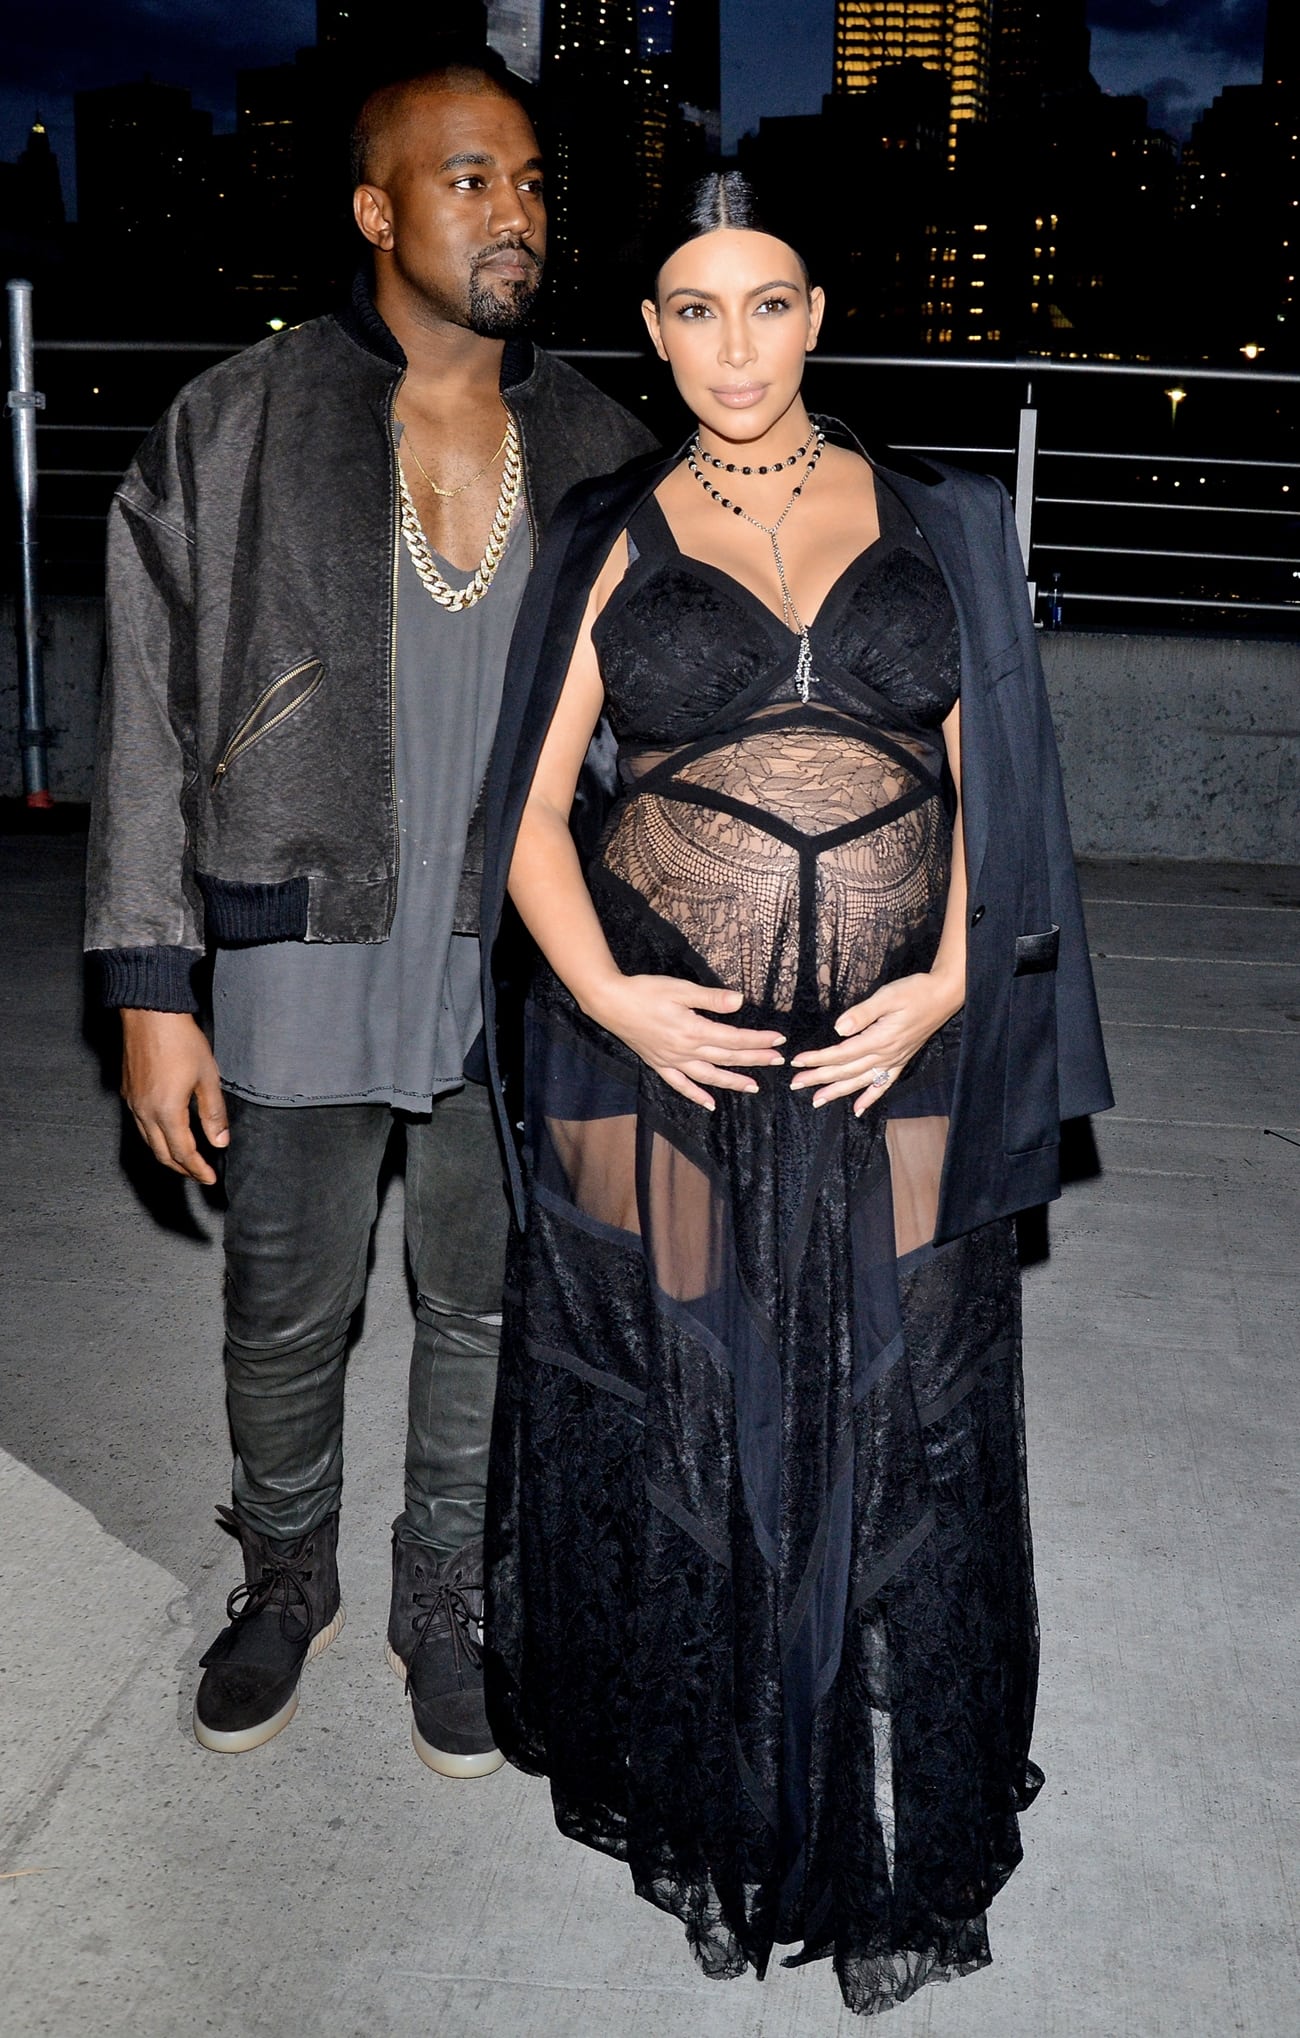 Kim Kardashian shows up her pregnant belly in a sheer dress with Kanye West at the Givenchy fashion show